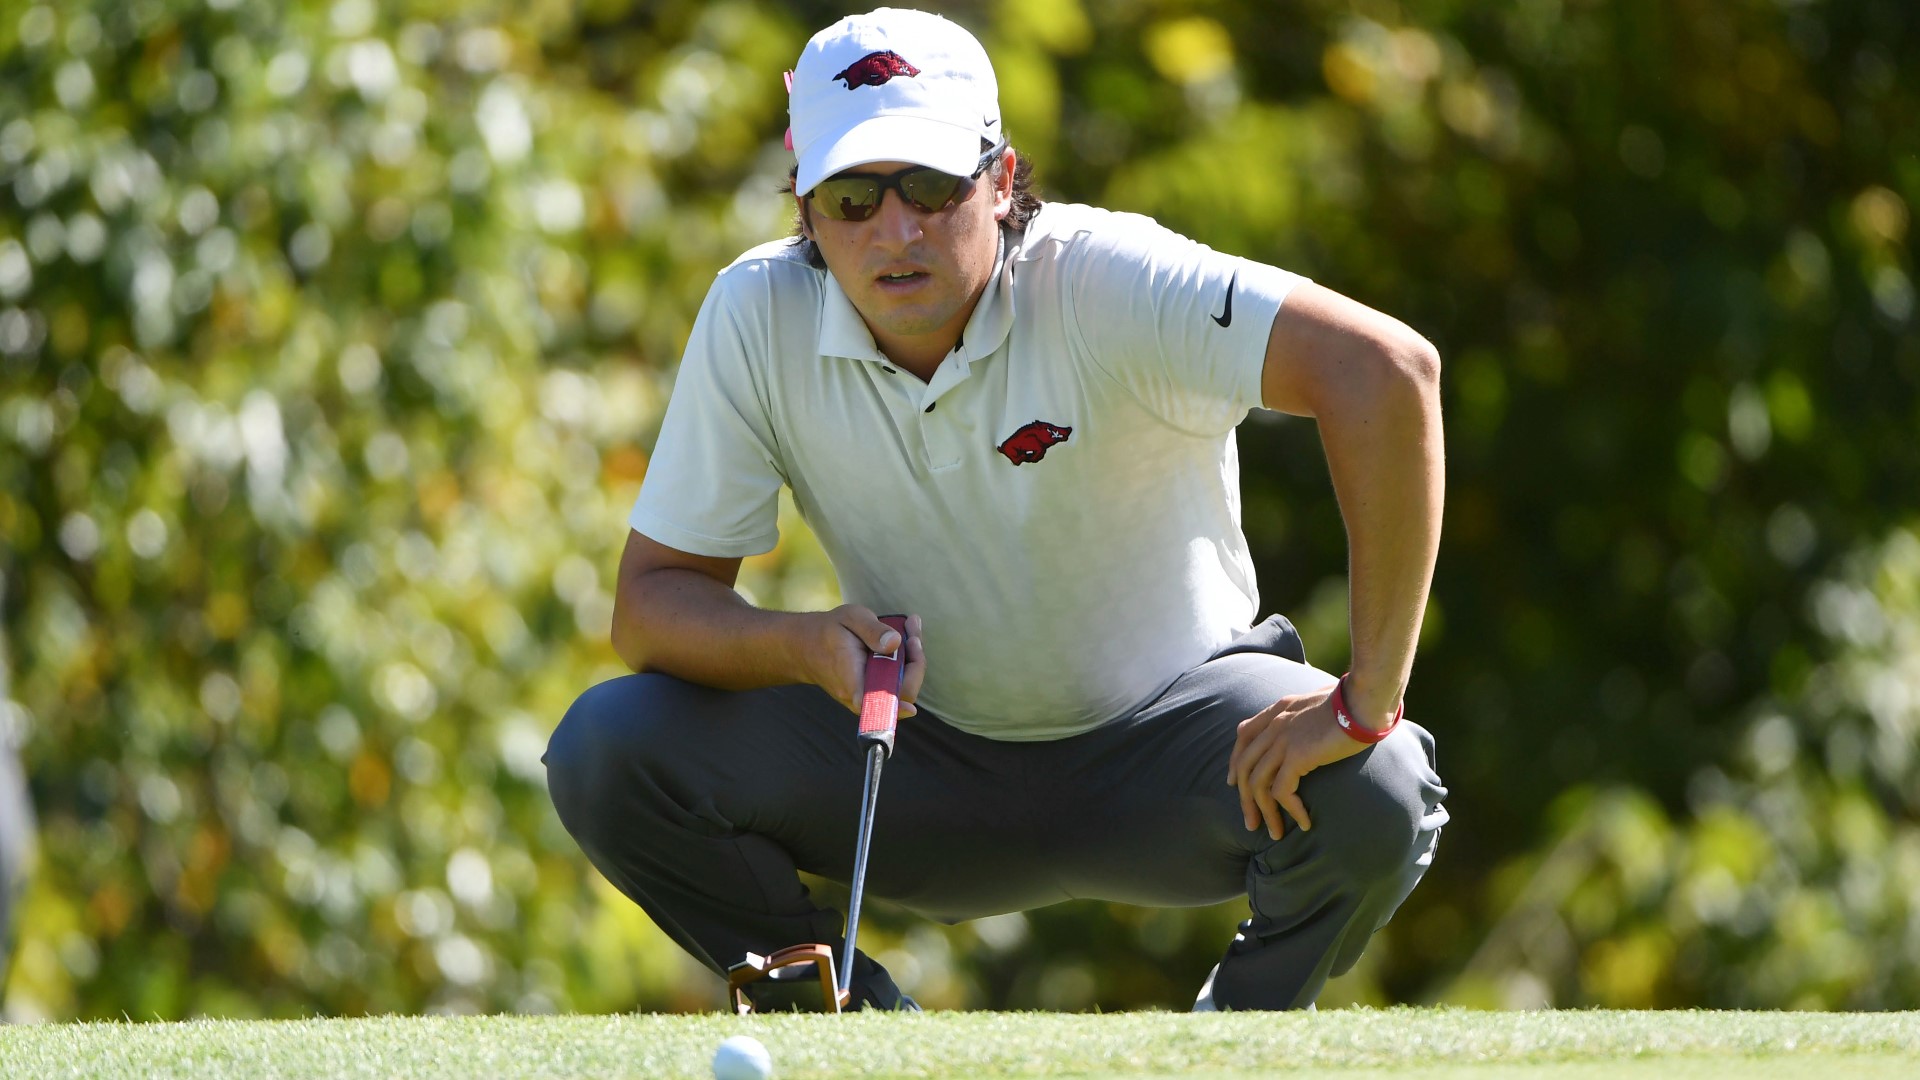 Arkansas senior Mateo Fernandez de Oliveira will play in three of golf's four majors this year after winning the Latin American Amateur Championship in January.